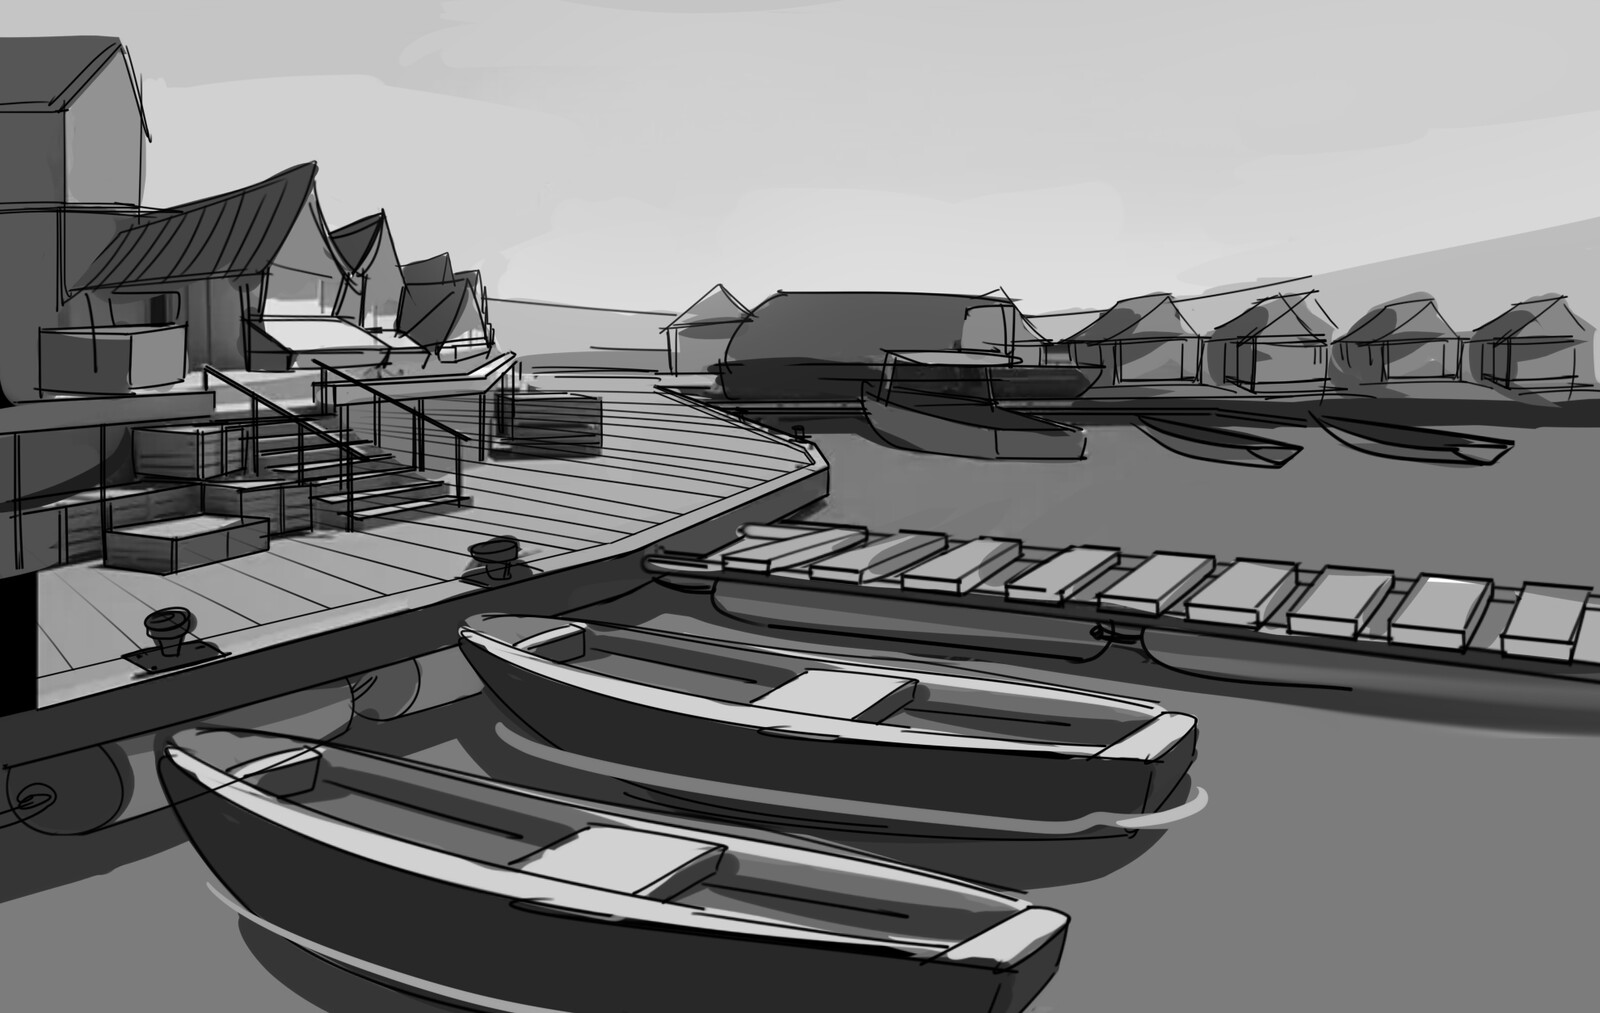 Concept art - Market area
The communities survive by:
-Trading
-Growing food in the waters - algae and kelp is used for many things
-Fishing for hardy crustaceans that thrive in the junk filled waters